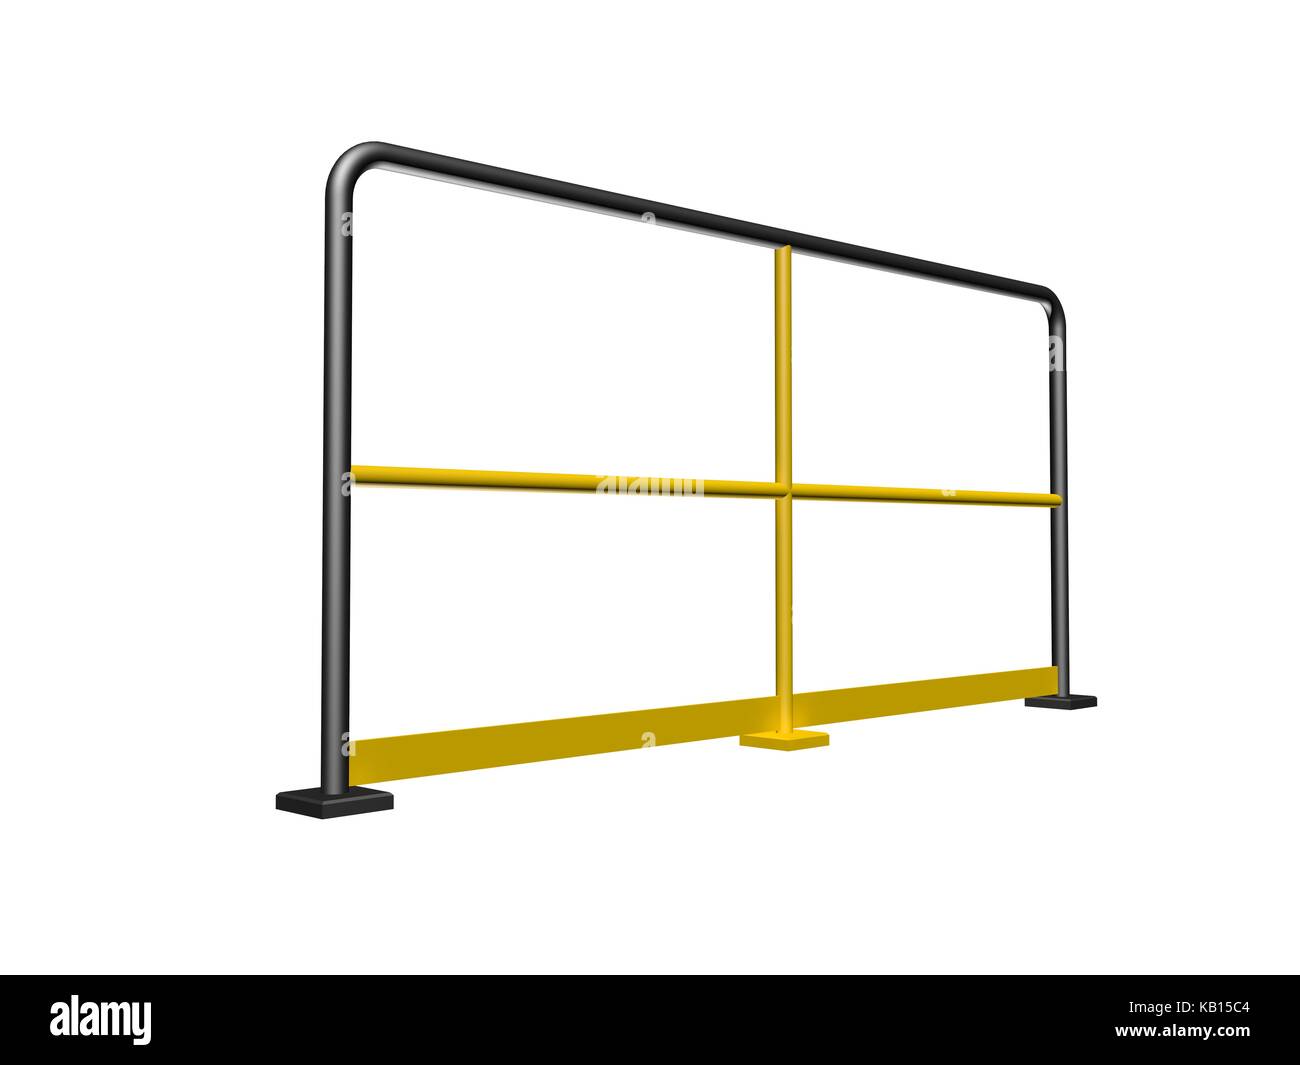 Side view of yellow and black industrial handrail railing section isolated on white background. 3d render illustration Stock Photo